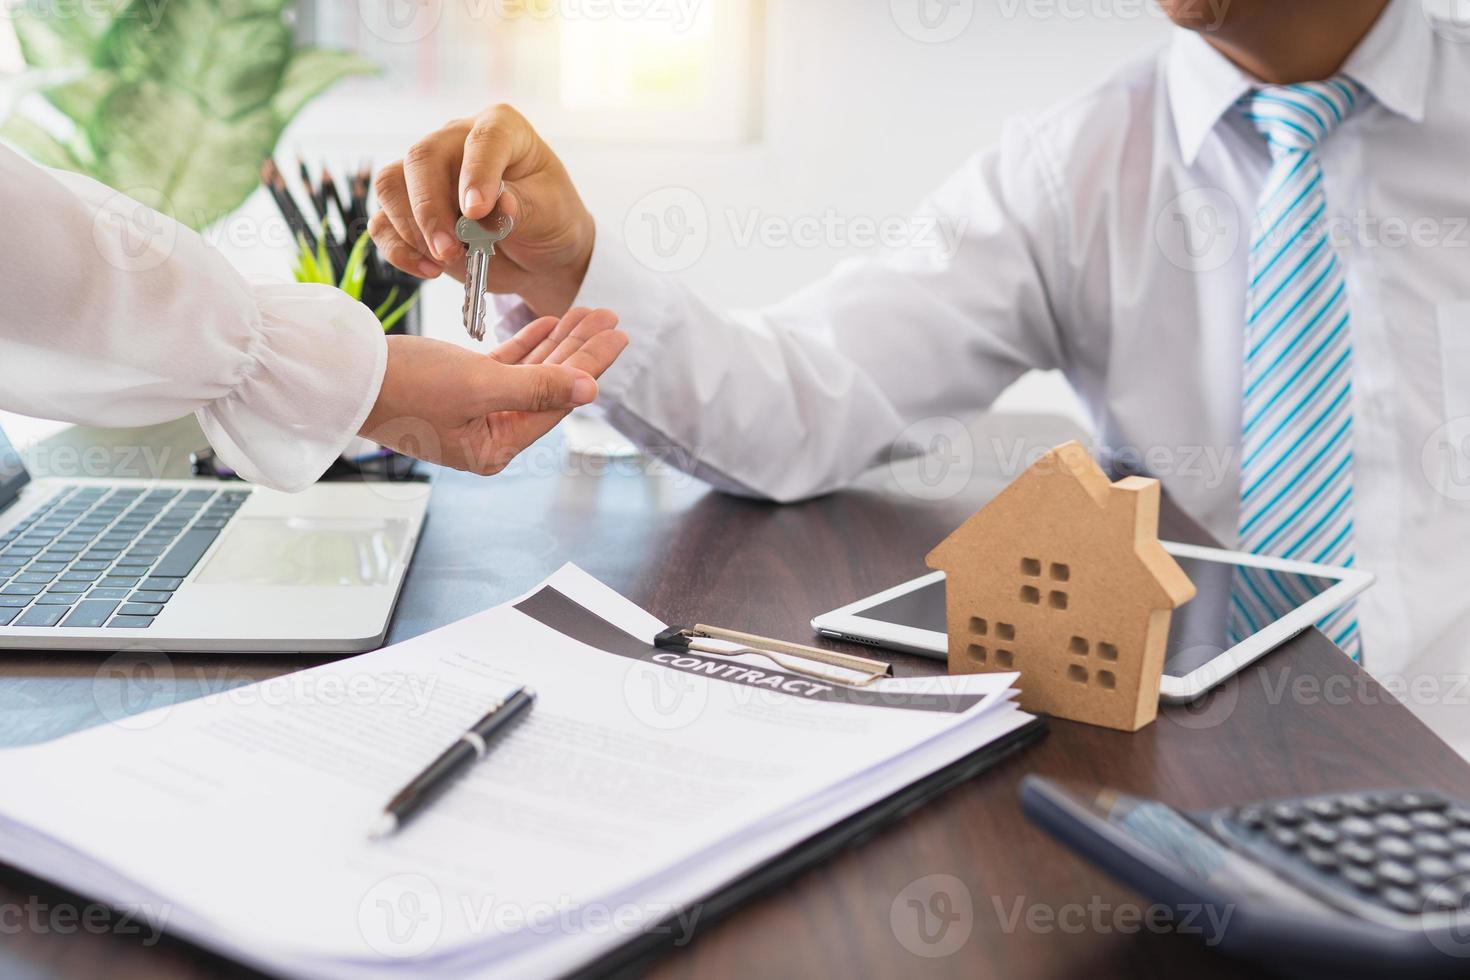 Businessman hands a key to a person next to laptop, contract, and model house photo